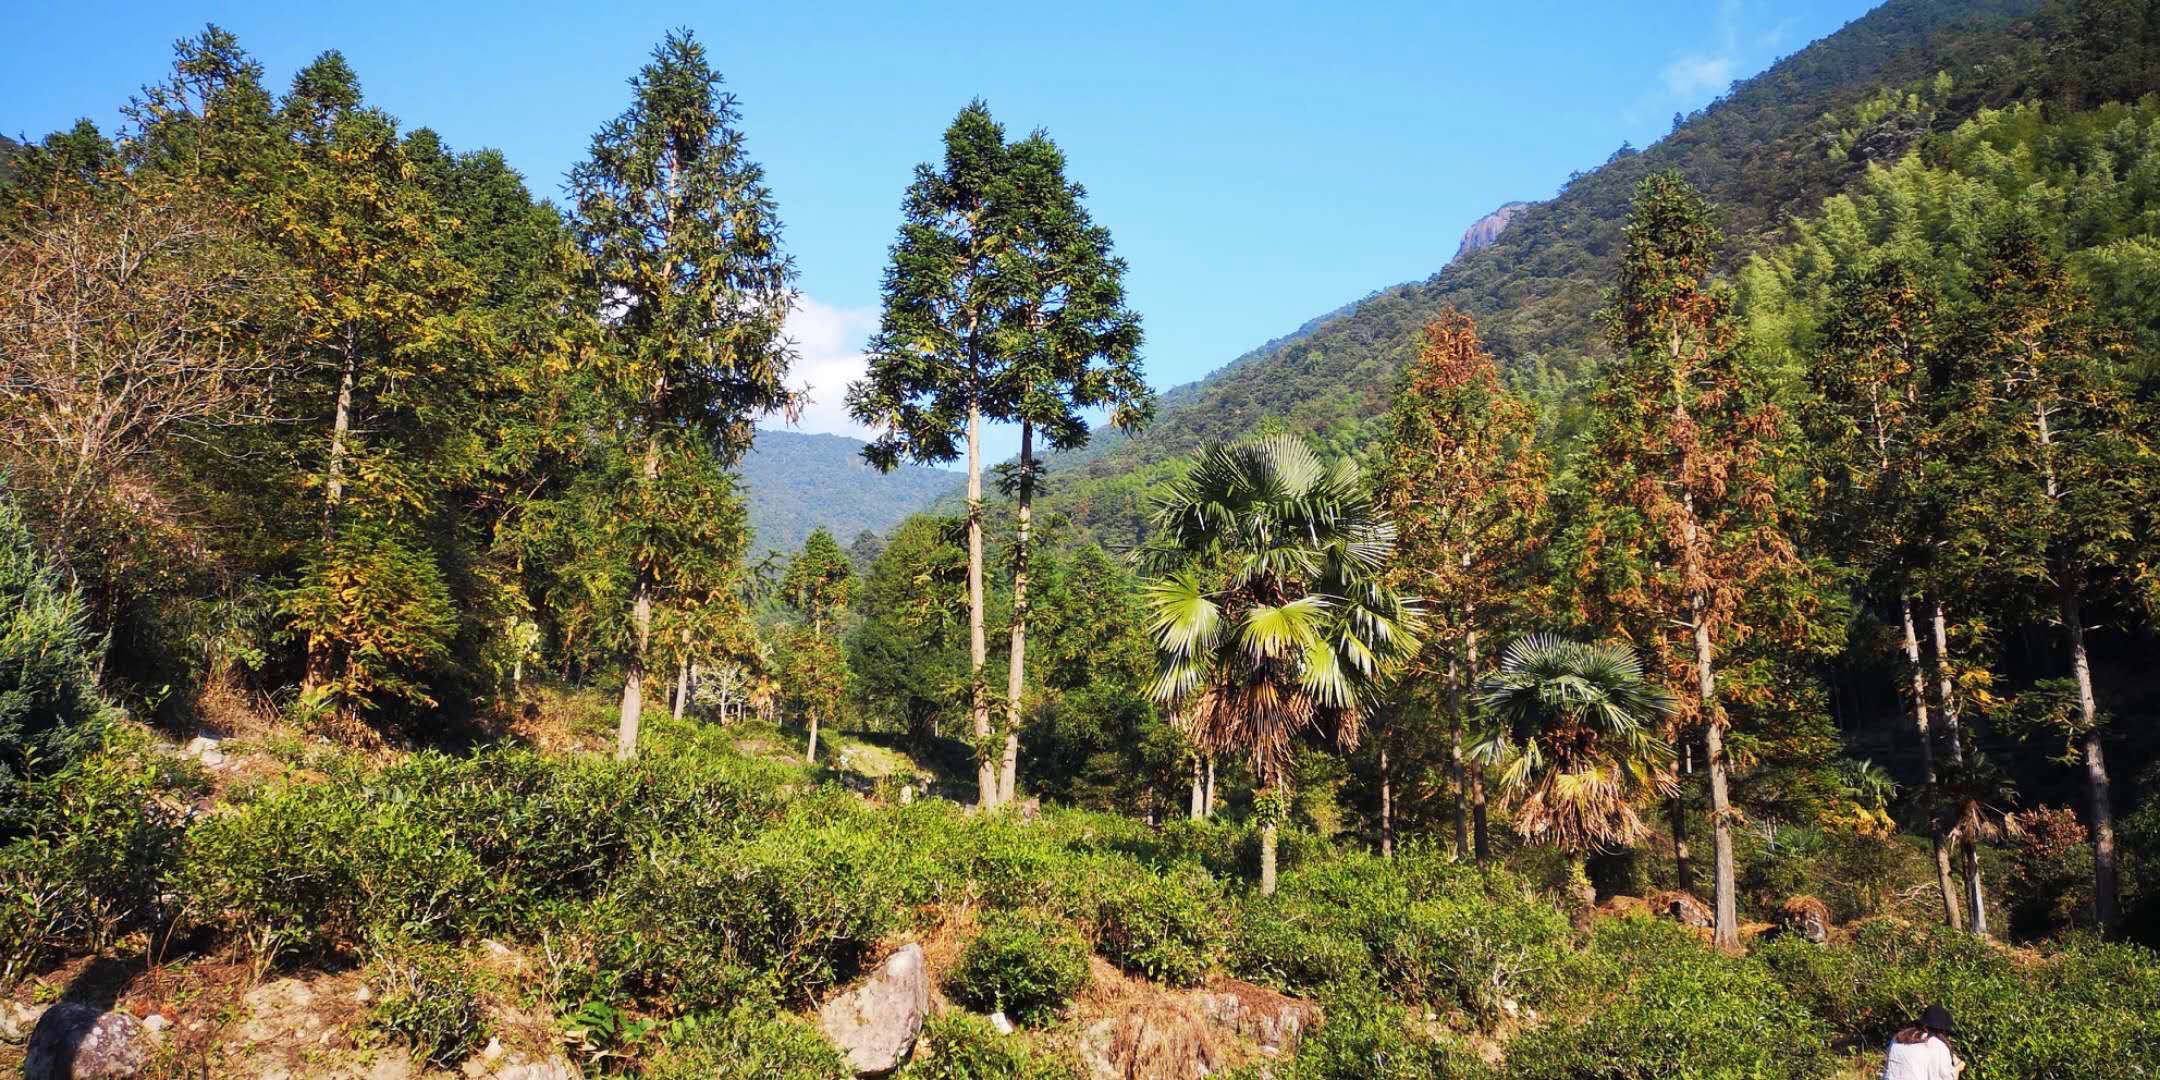 Low tea bushes on a mountain slope surrounded by tall pines and palms.